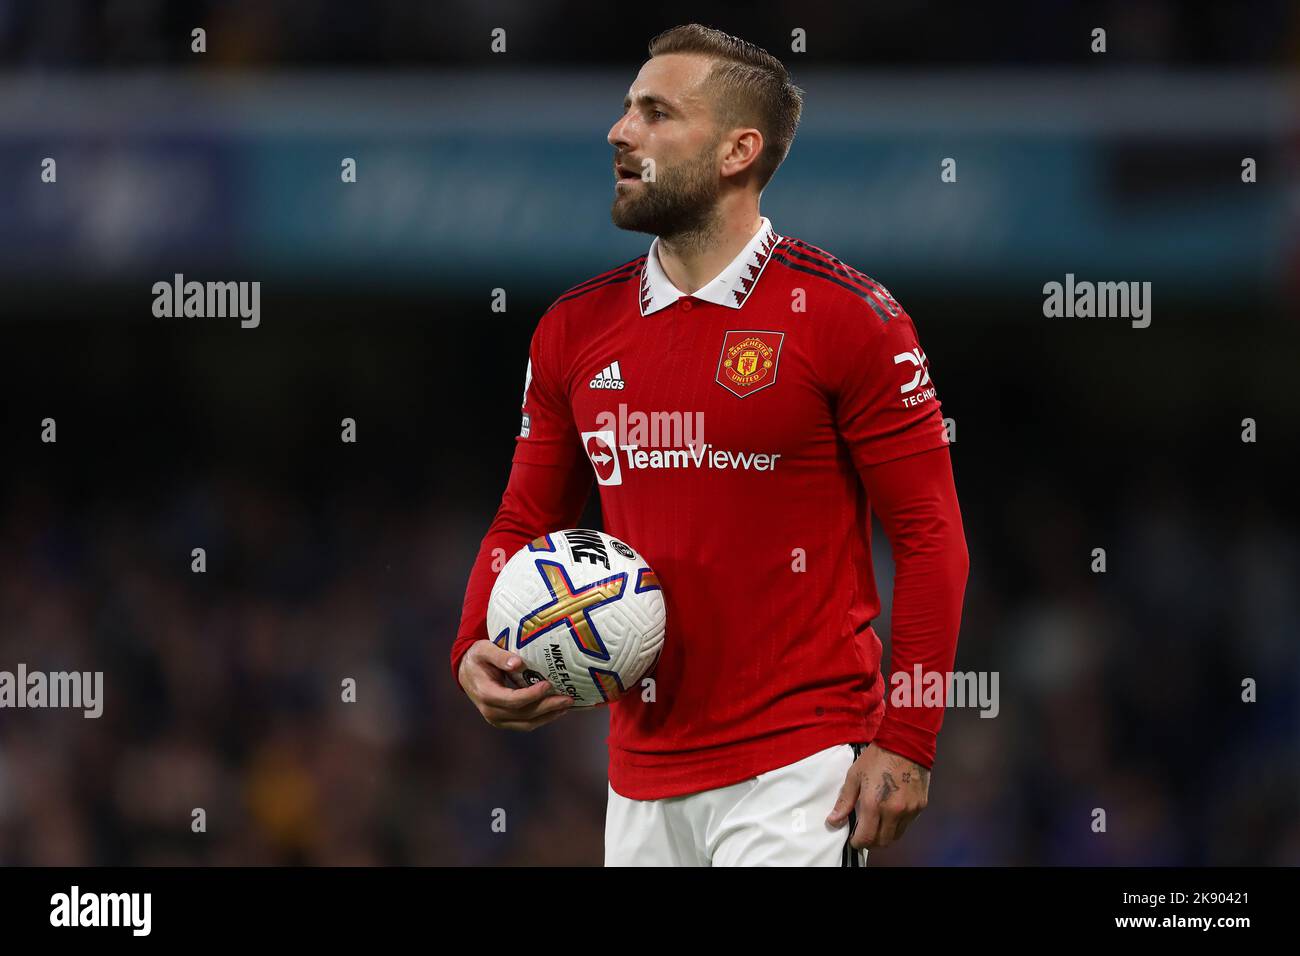 Luke Shaw of Manchester United - Chelsea v Manchester United, Premier League, Stamford Bridge, London, UK - 22nd October 2022  Editorial Use Only - DataCo restrictions apply Stock Photo